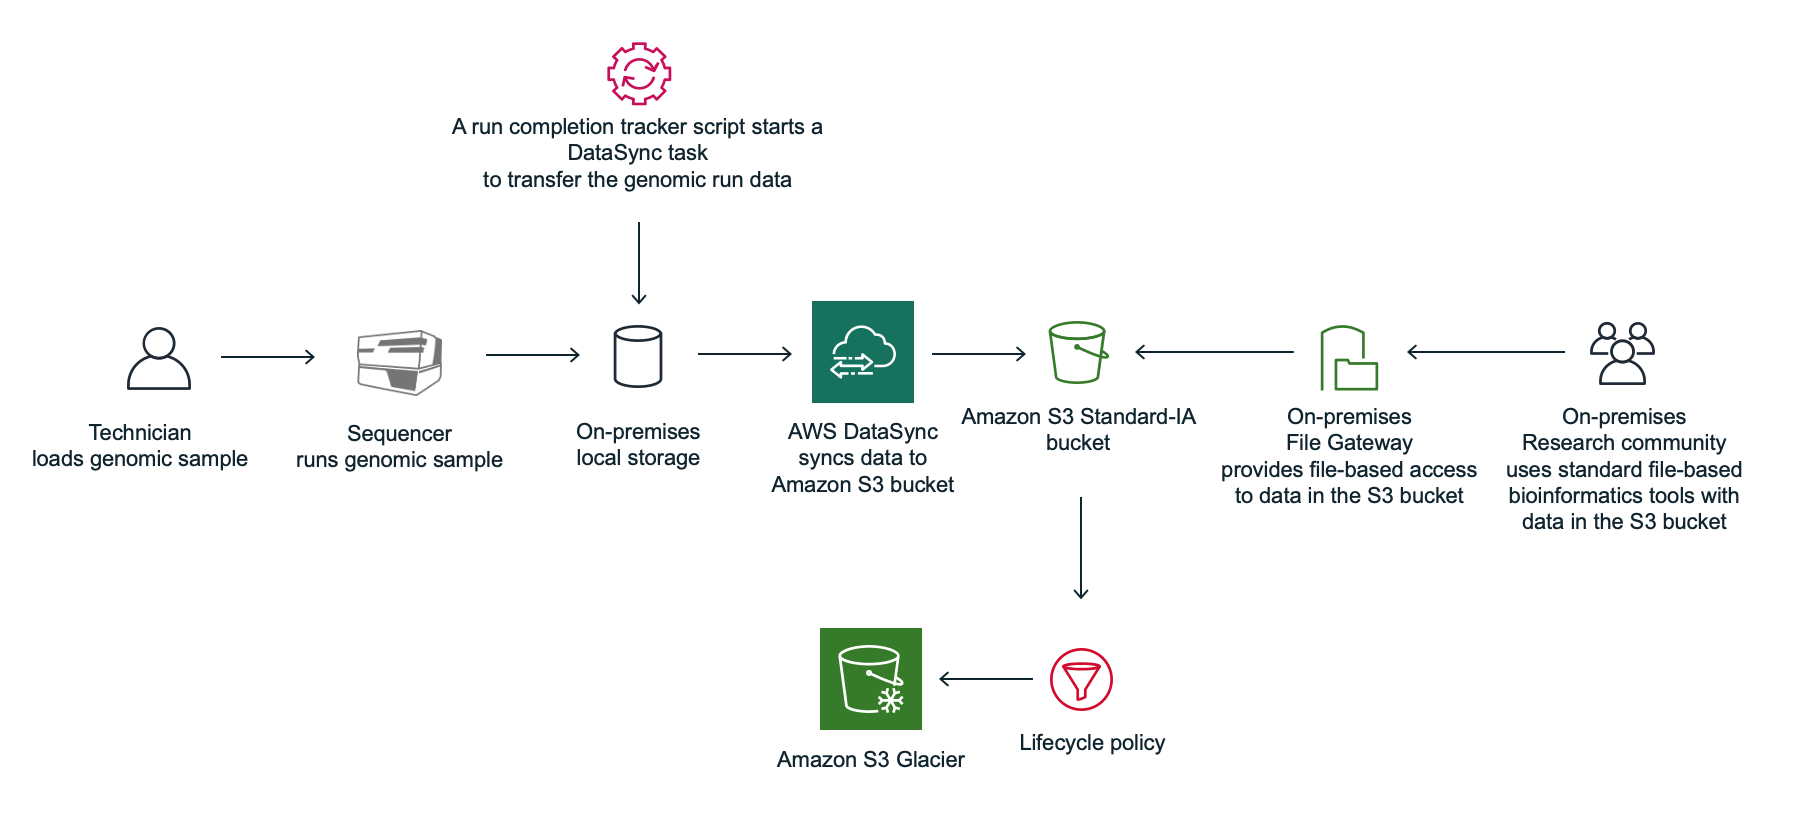 

Process workflow using a run completion tracker script
with AWS DataSync

